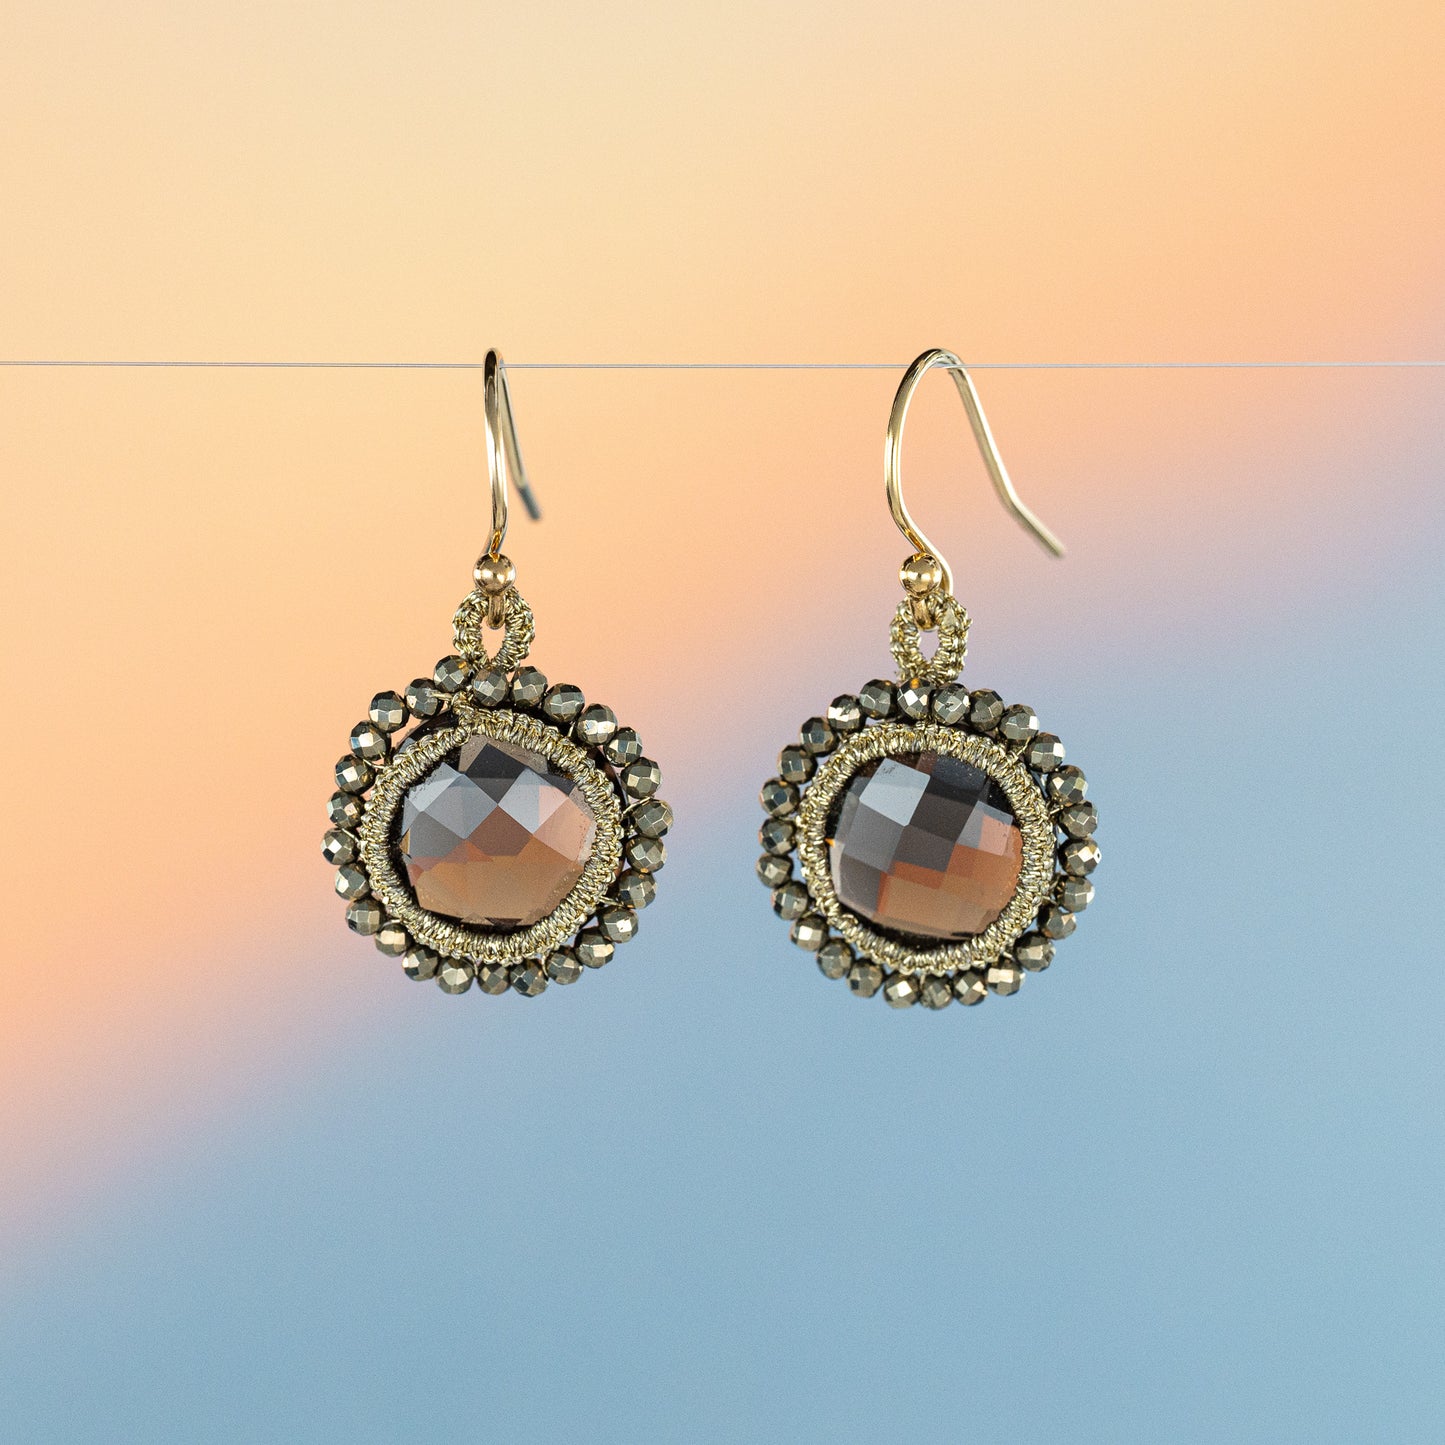 Danielle Welmond Caged Smokey Topaz and Pyrite Earrings